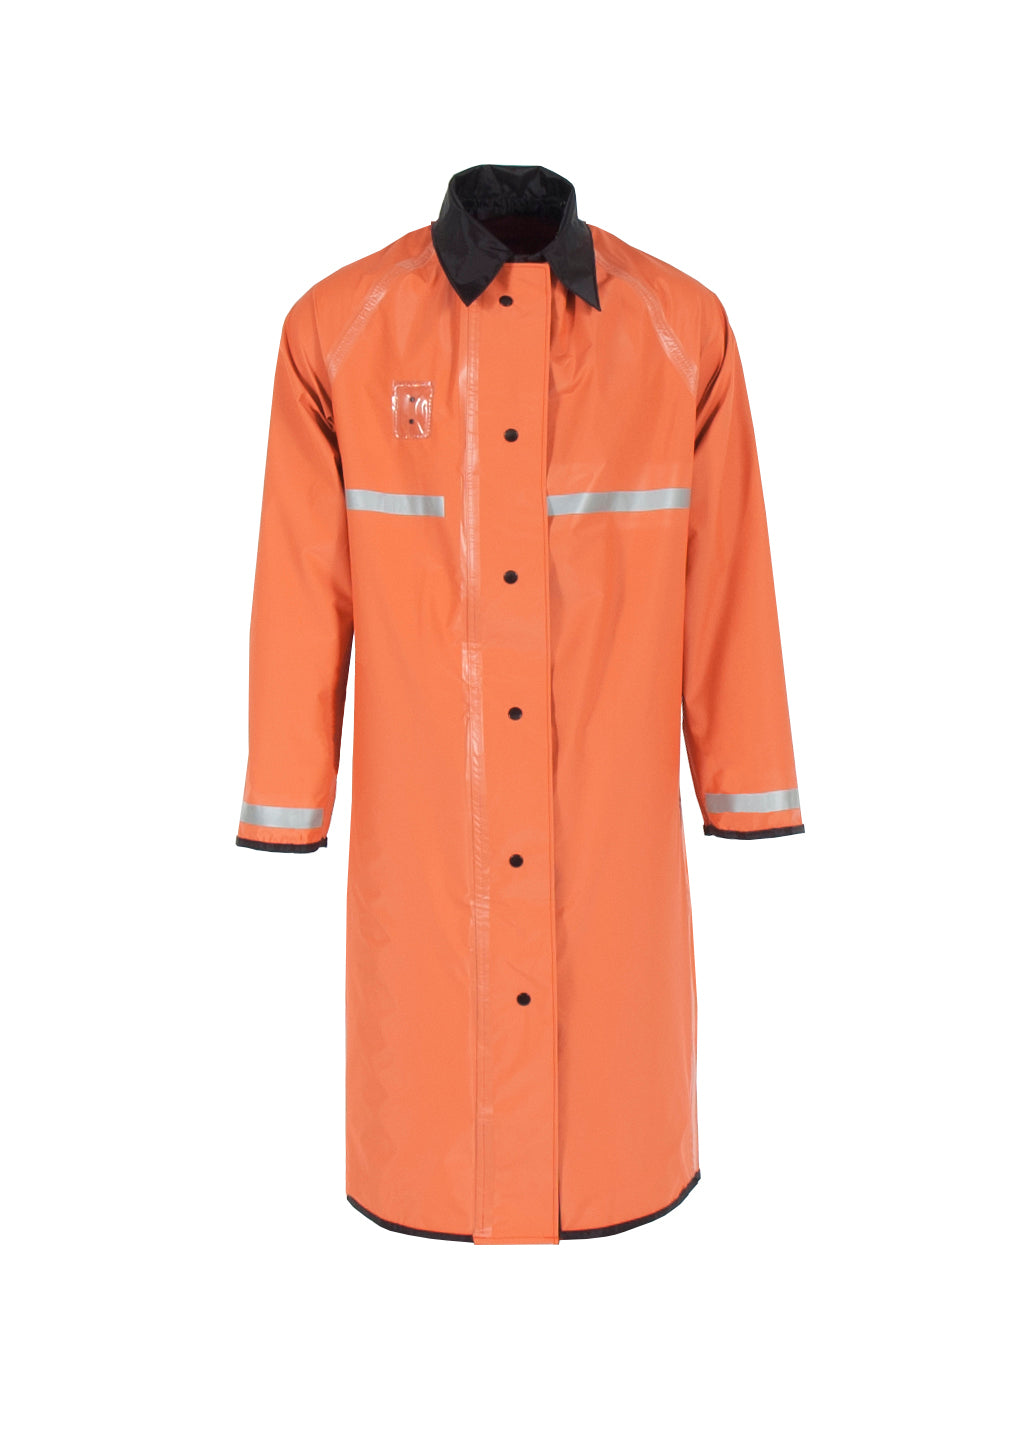 447RCH3M Reversible Series Coat with 3M Reflective Taping